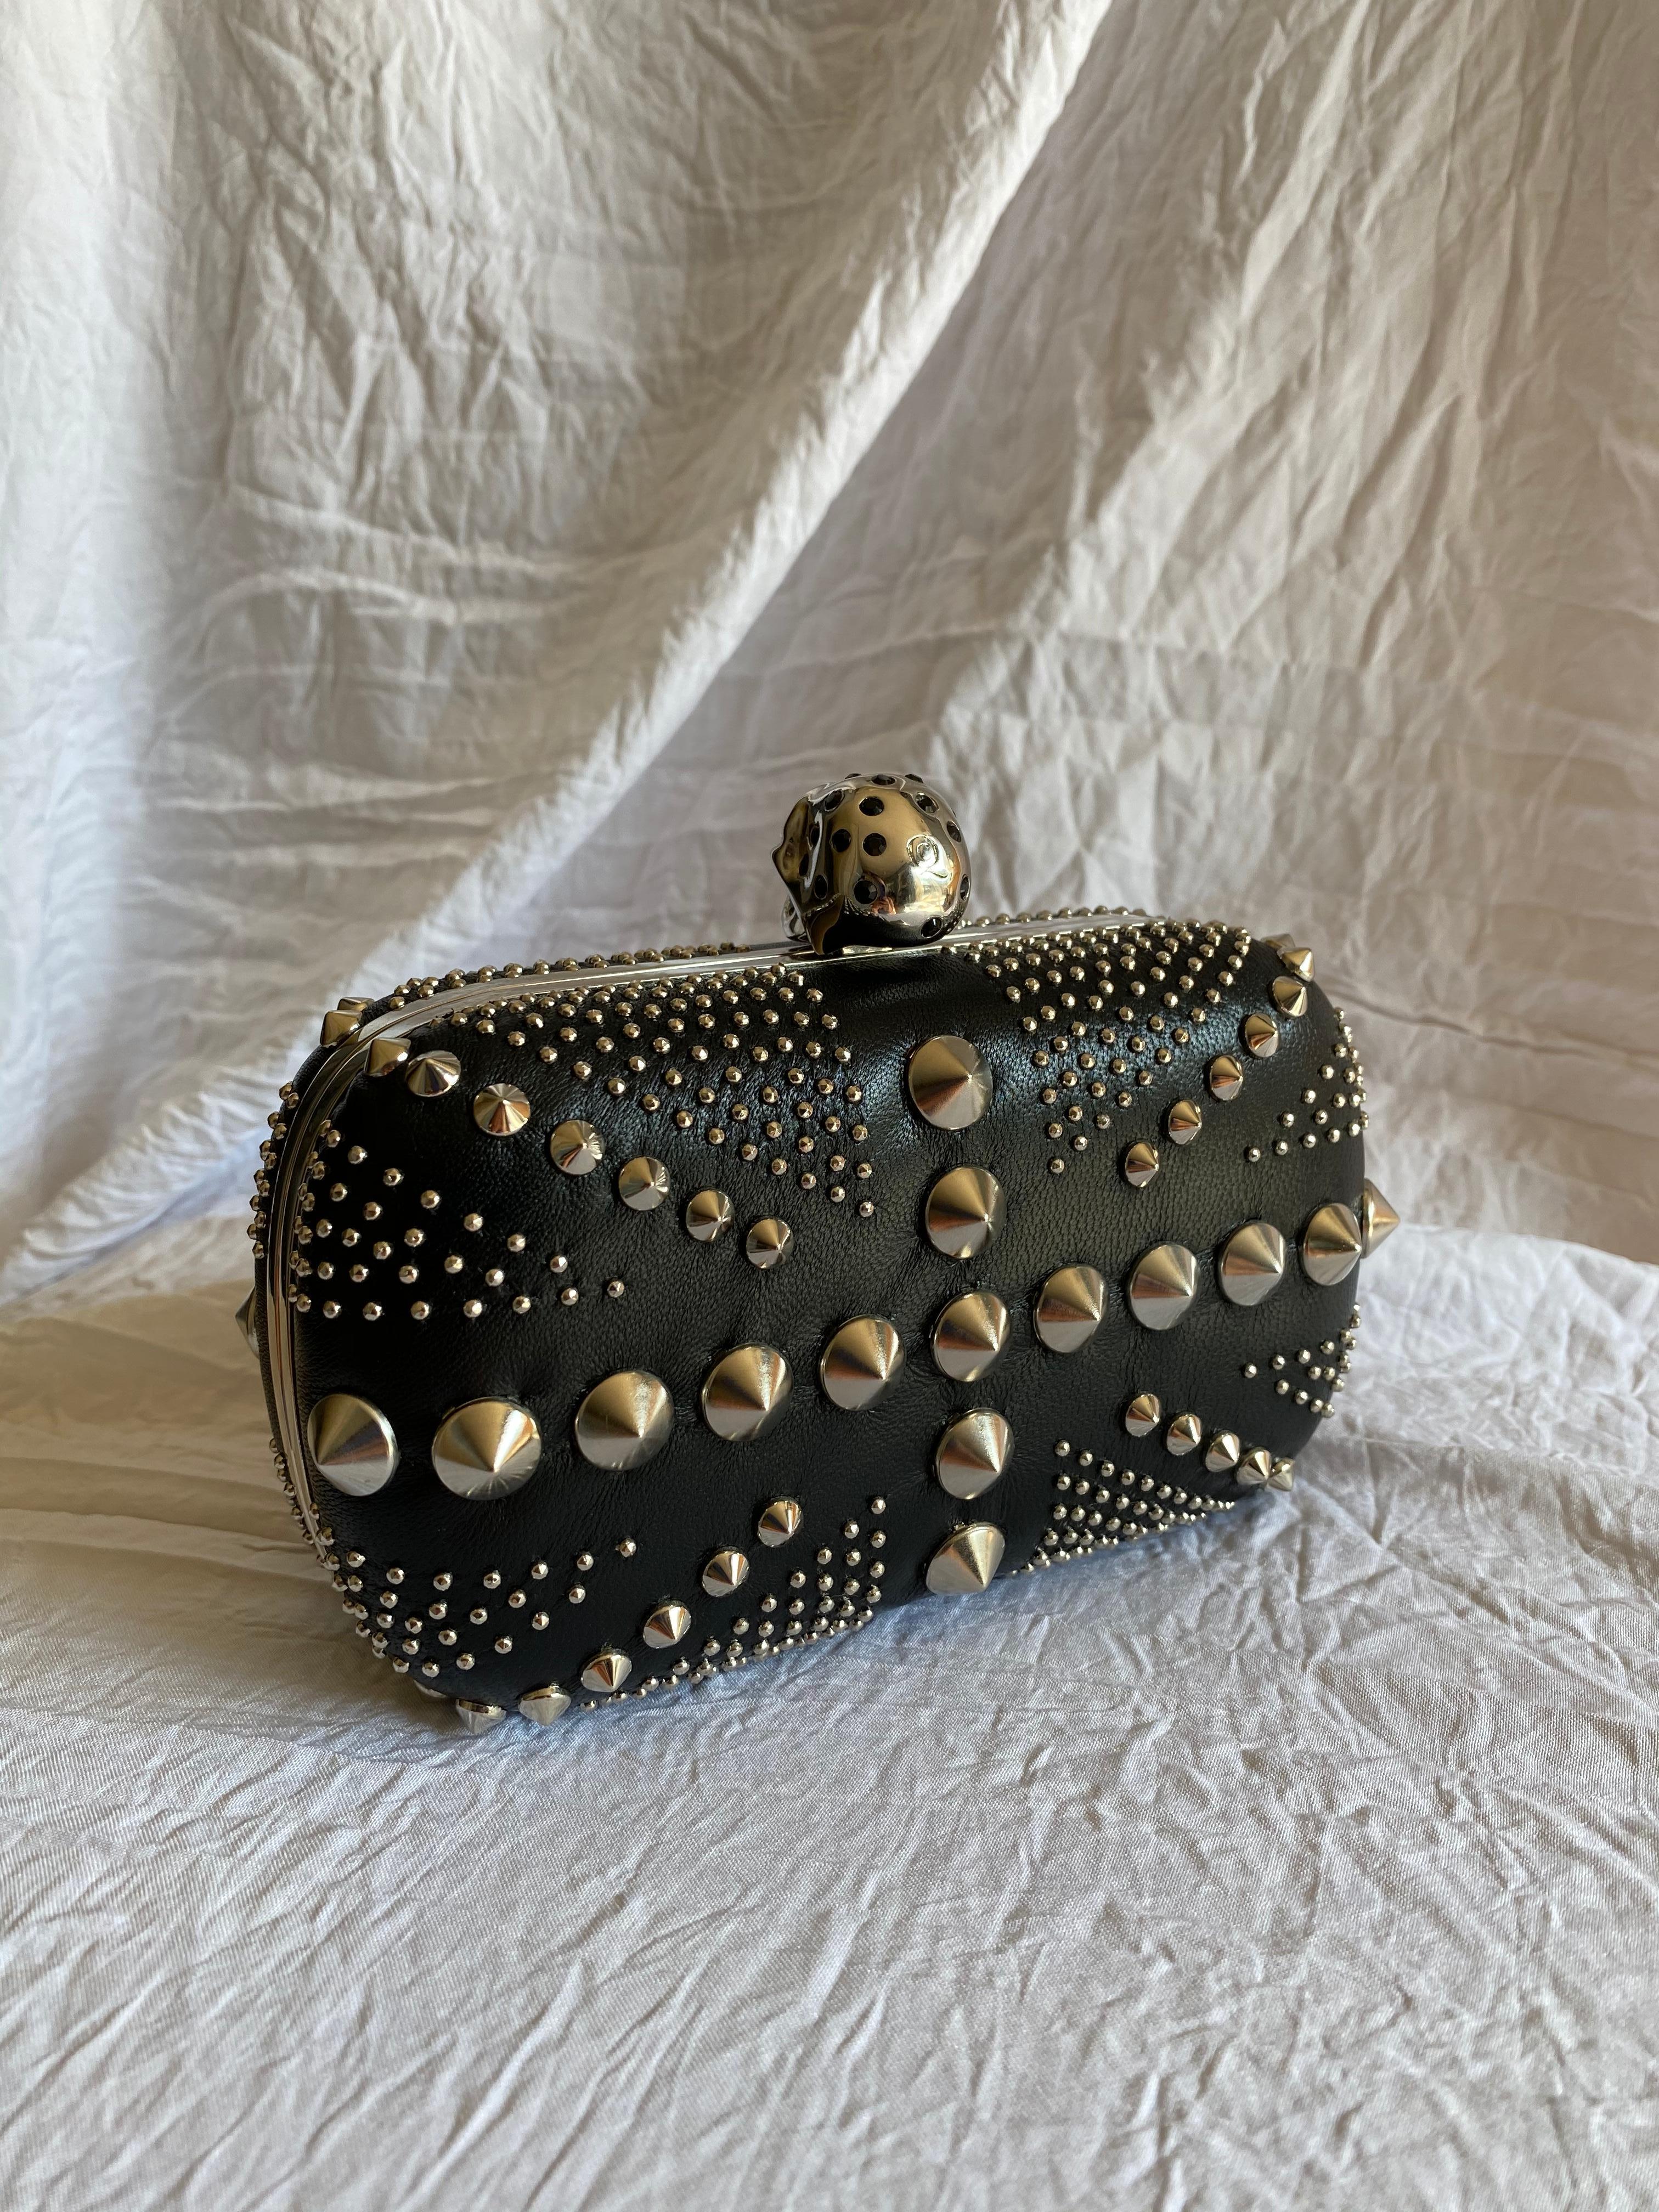 Campy UK patriotism intersects with relentless grunge in this McQueen classic. Made with smooth full grain leather, silver-tone hardware, and black Swarovski crystal eyes.

$1,200.00

Condition: Like new, never used. 
Exterior: All studs and stones